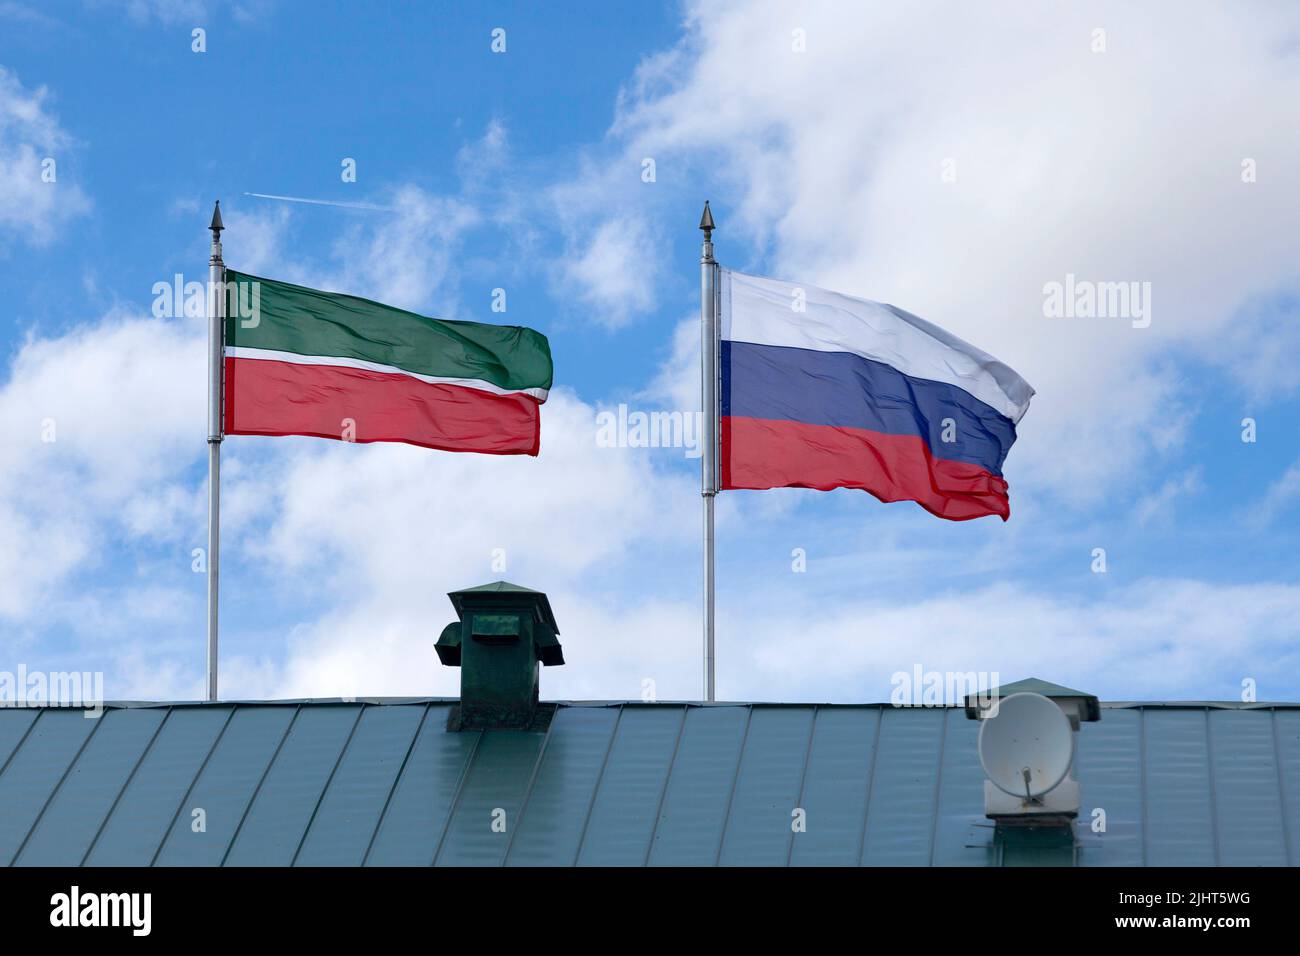 Flag of the Republic of Tatarstan next to the flag of the Federation of Russia waving atop of their poles. Stock Photo